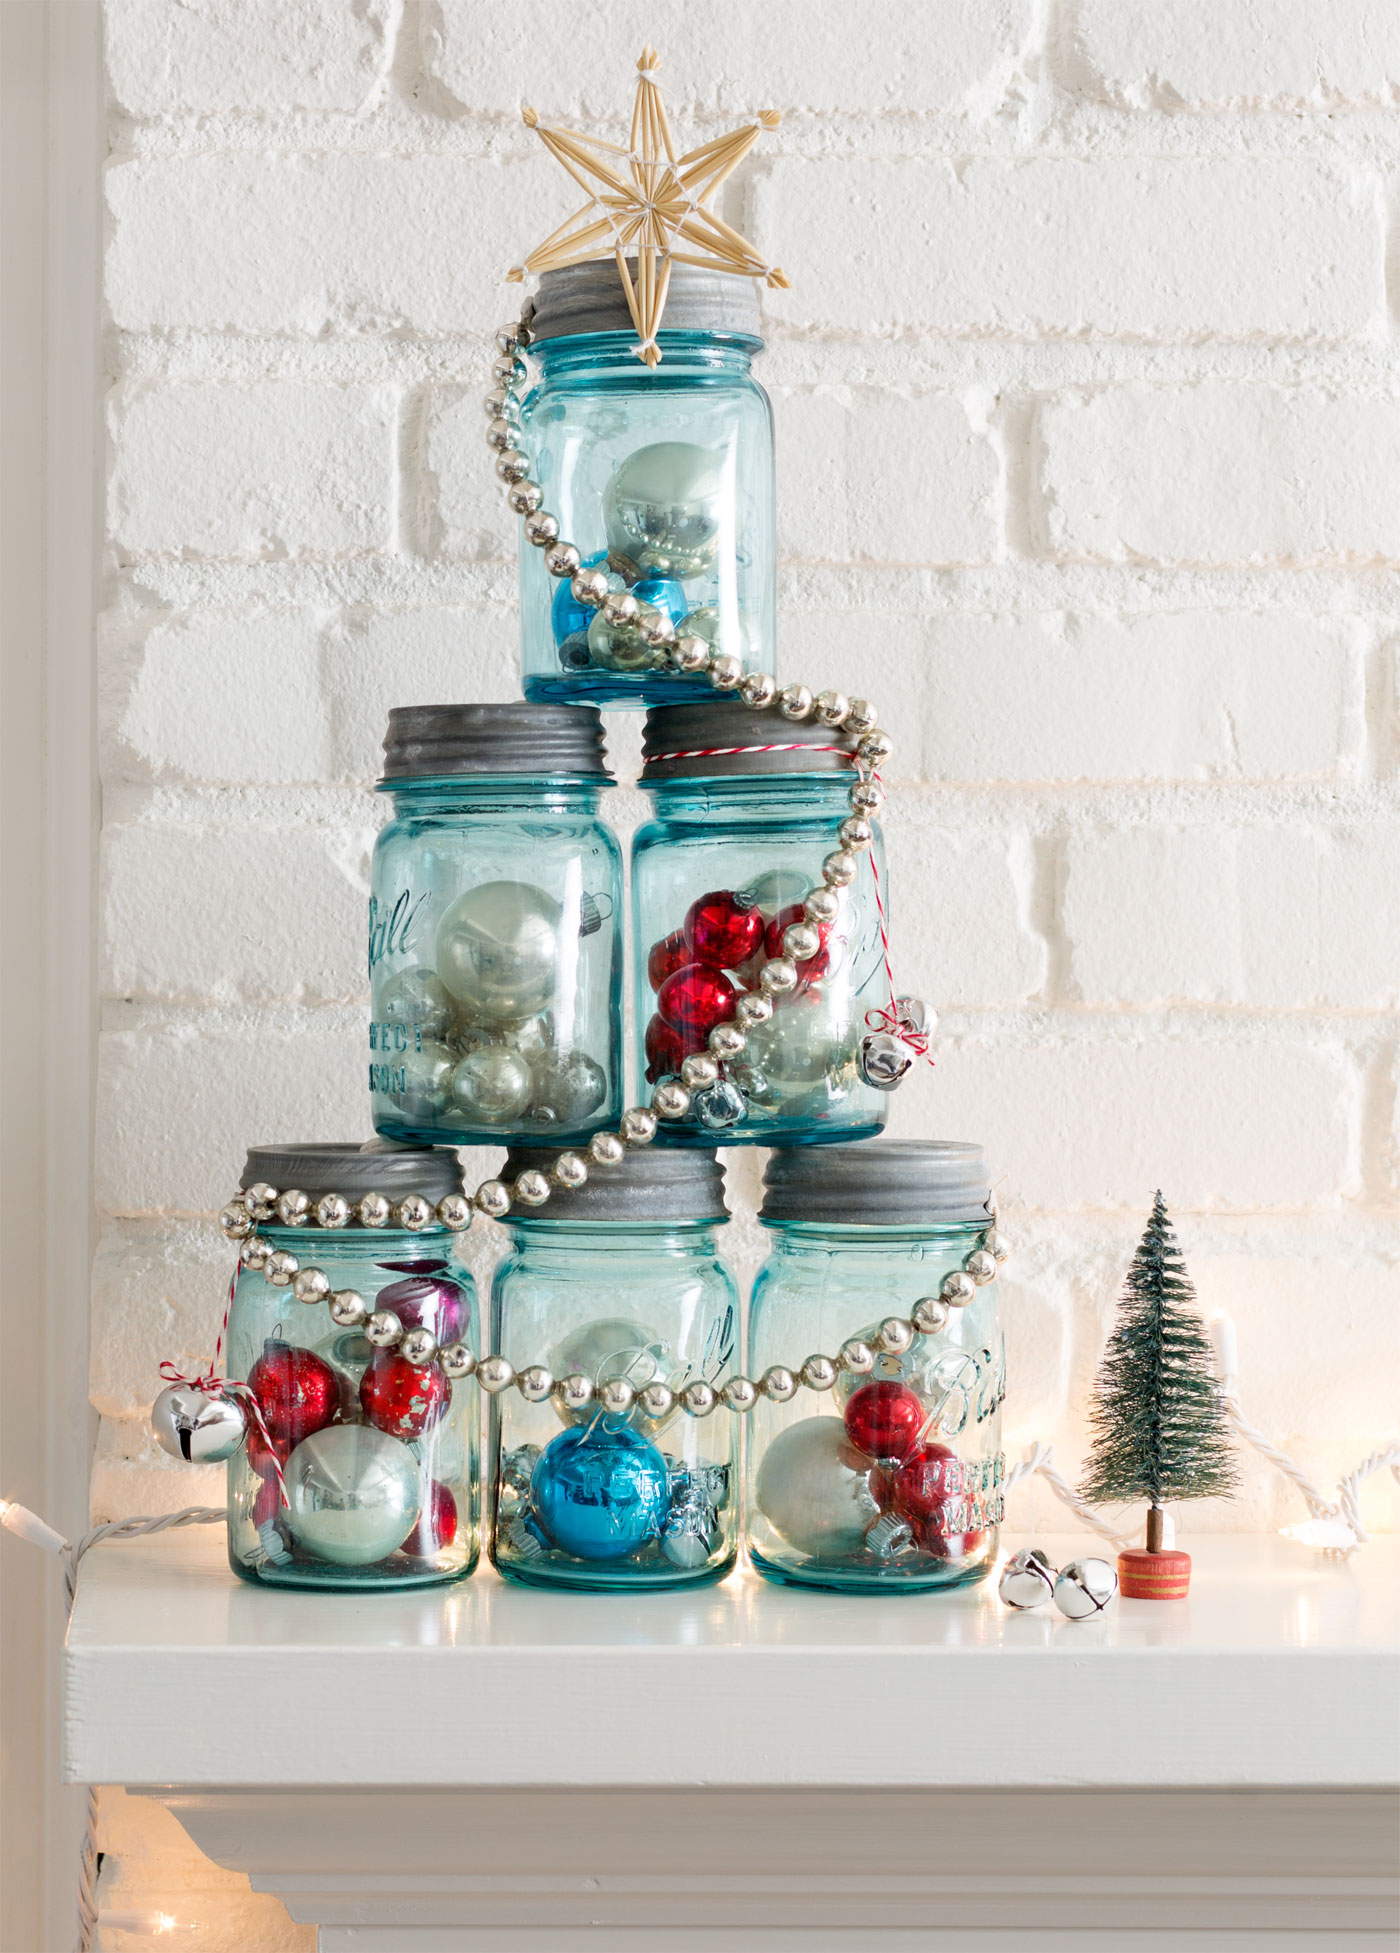 35+ Magical Ways To Use Mason Jars This Christmas | Architecture & Design